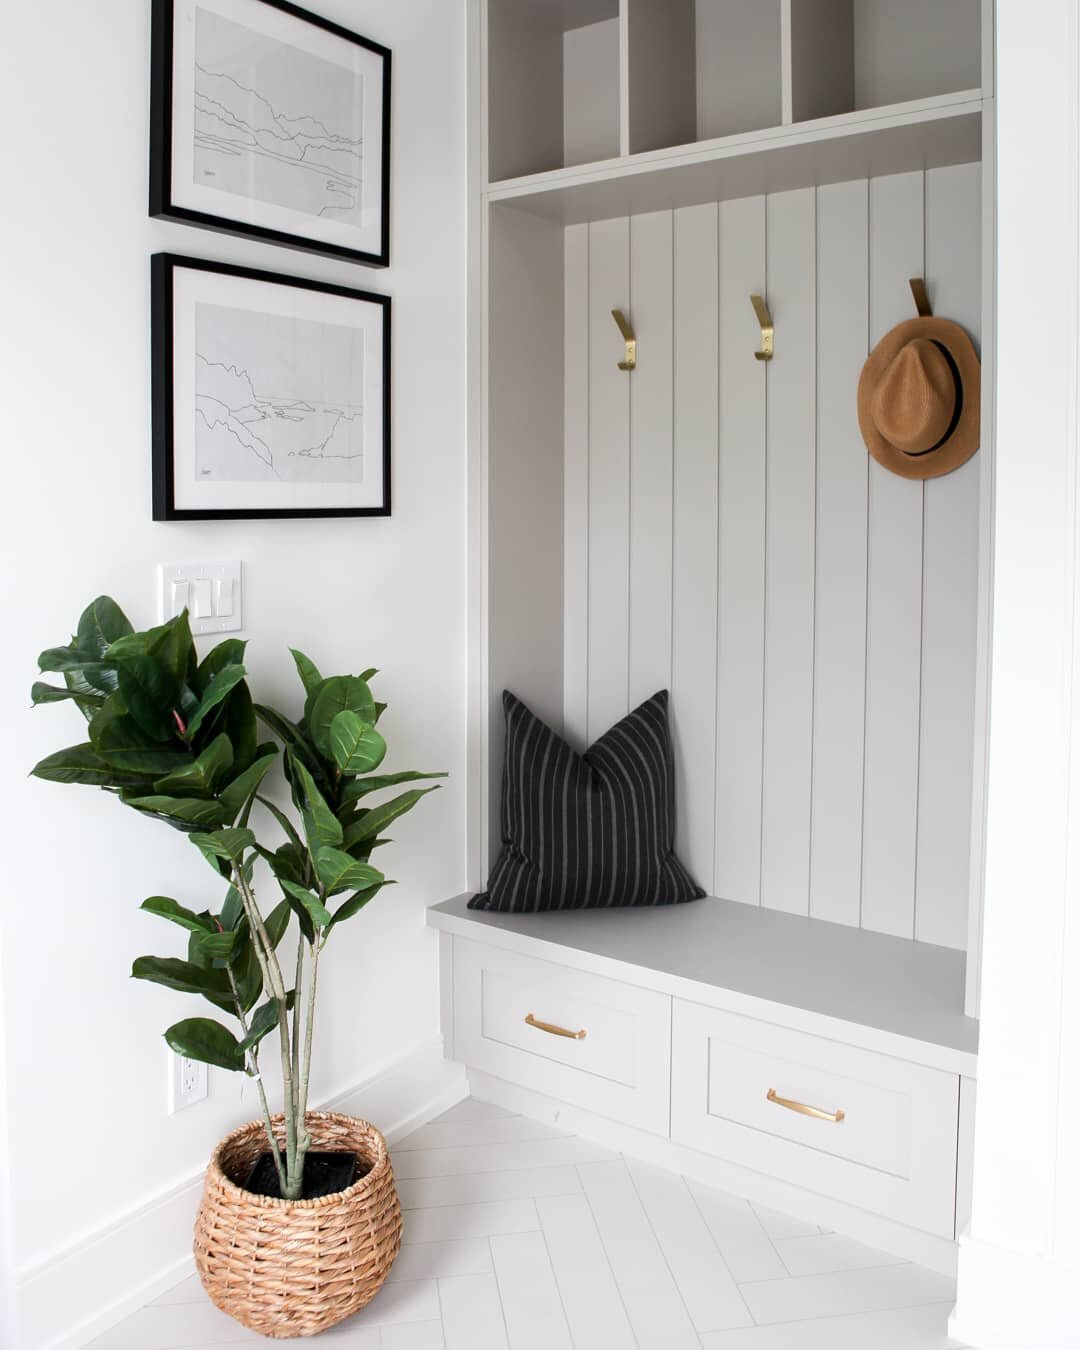 I haven't posted the mudroom area. It was hard to get it all in the shot, but it did get my favourite feature, the herringbone tile😍 That I found for a wicked deal and then cursed later that I didn't use it in my house! Haha, live and learn.
.
.
.
.